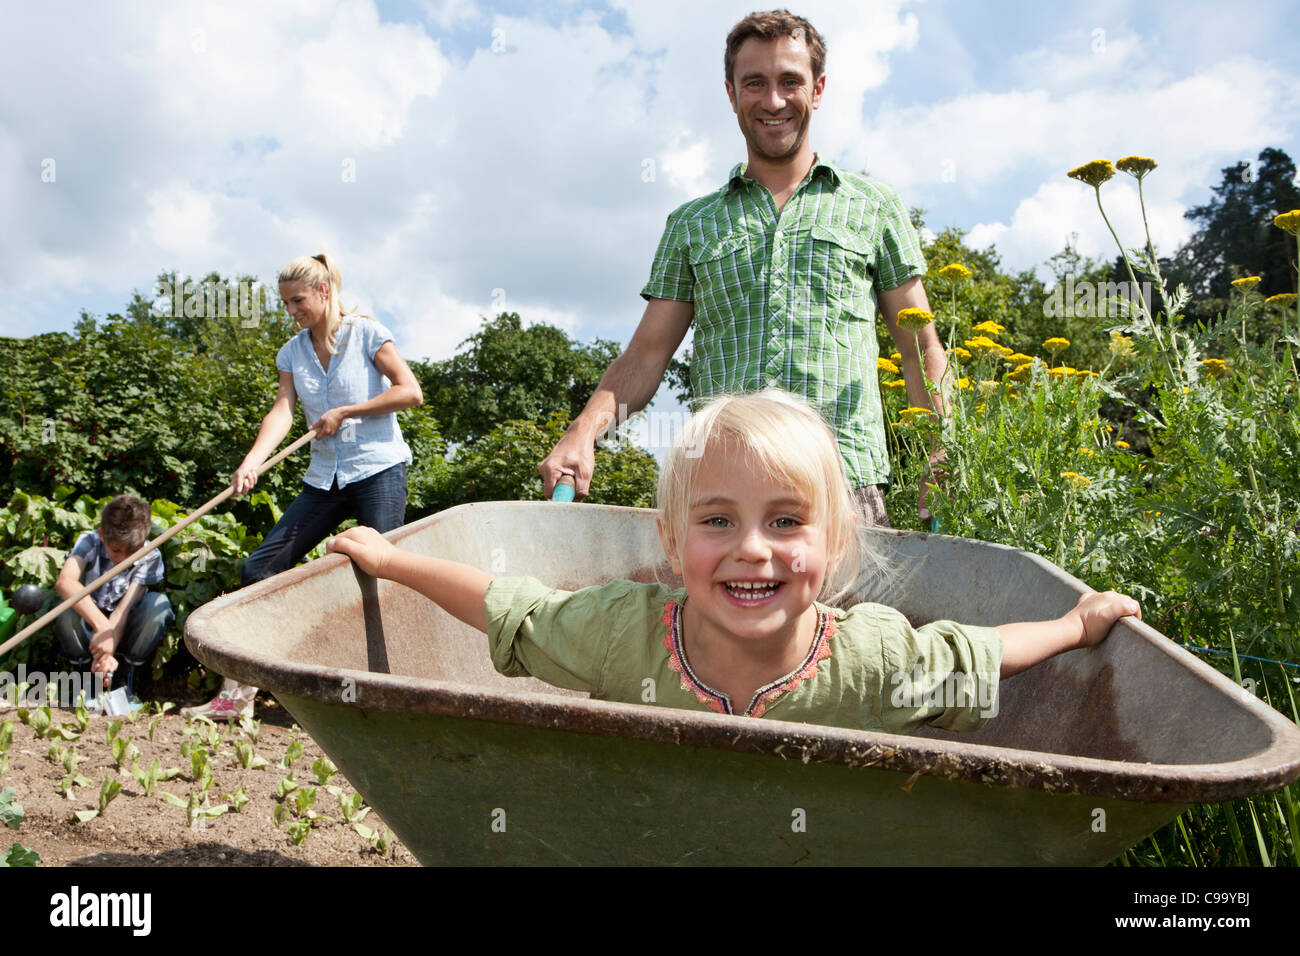 Germany, Bavaria, Altenthann, Family gardening together in garden Stock Photo